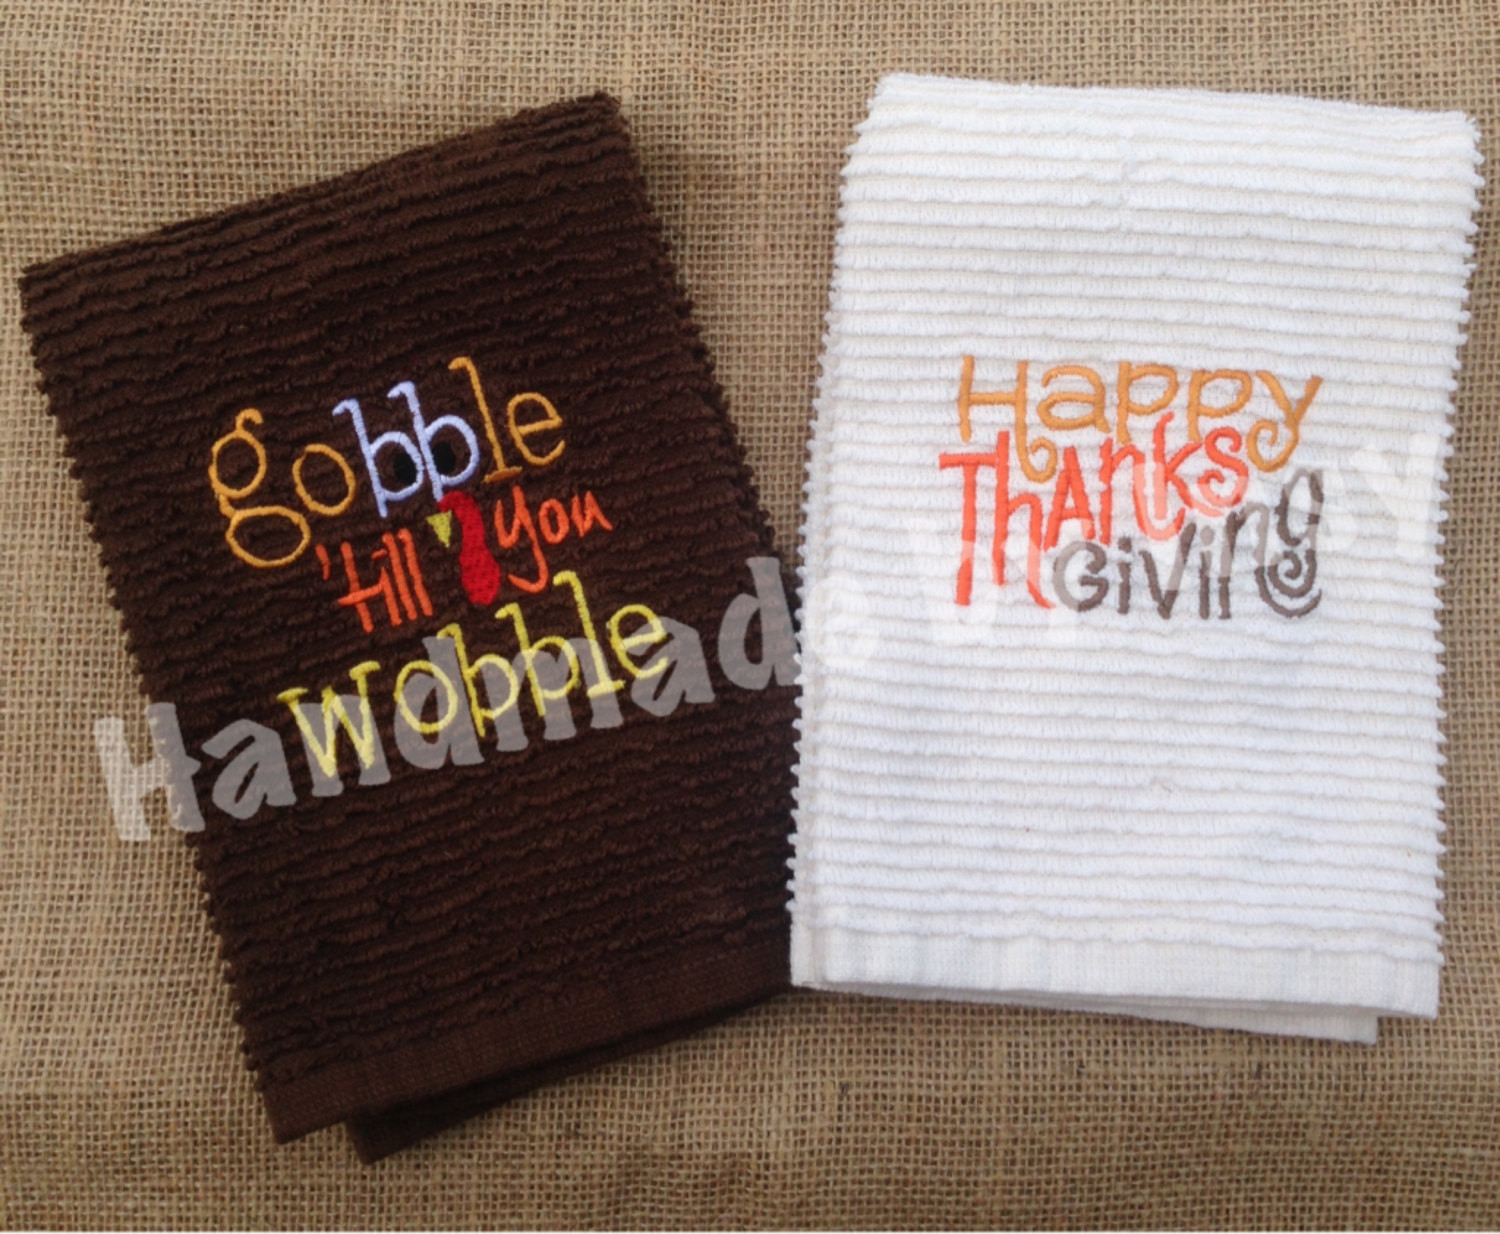 Thanksgiving Kitchen Towels
 Thanksgiving Dish Towels set of 2 Gobble Till You Wobble